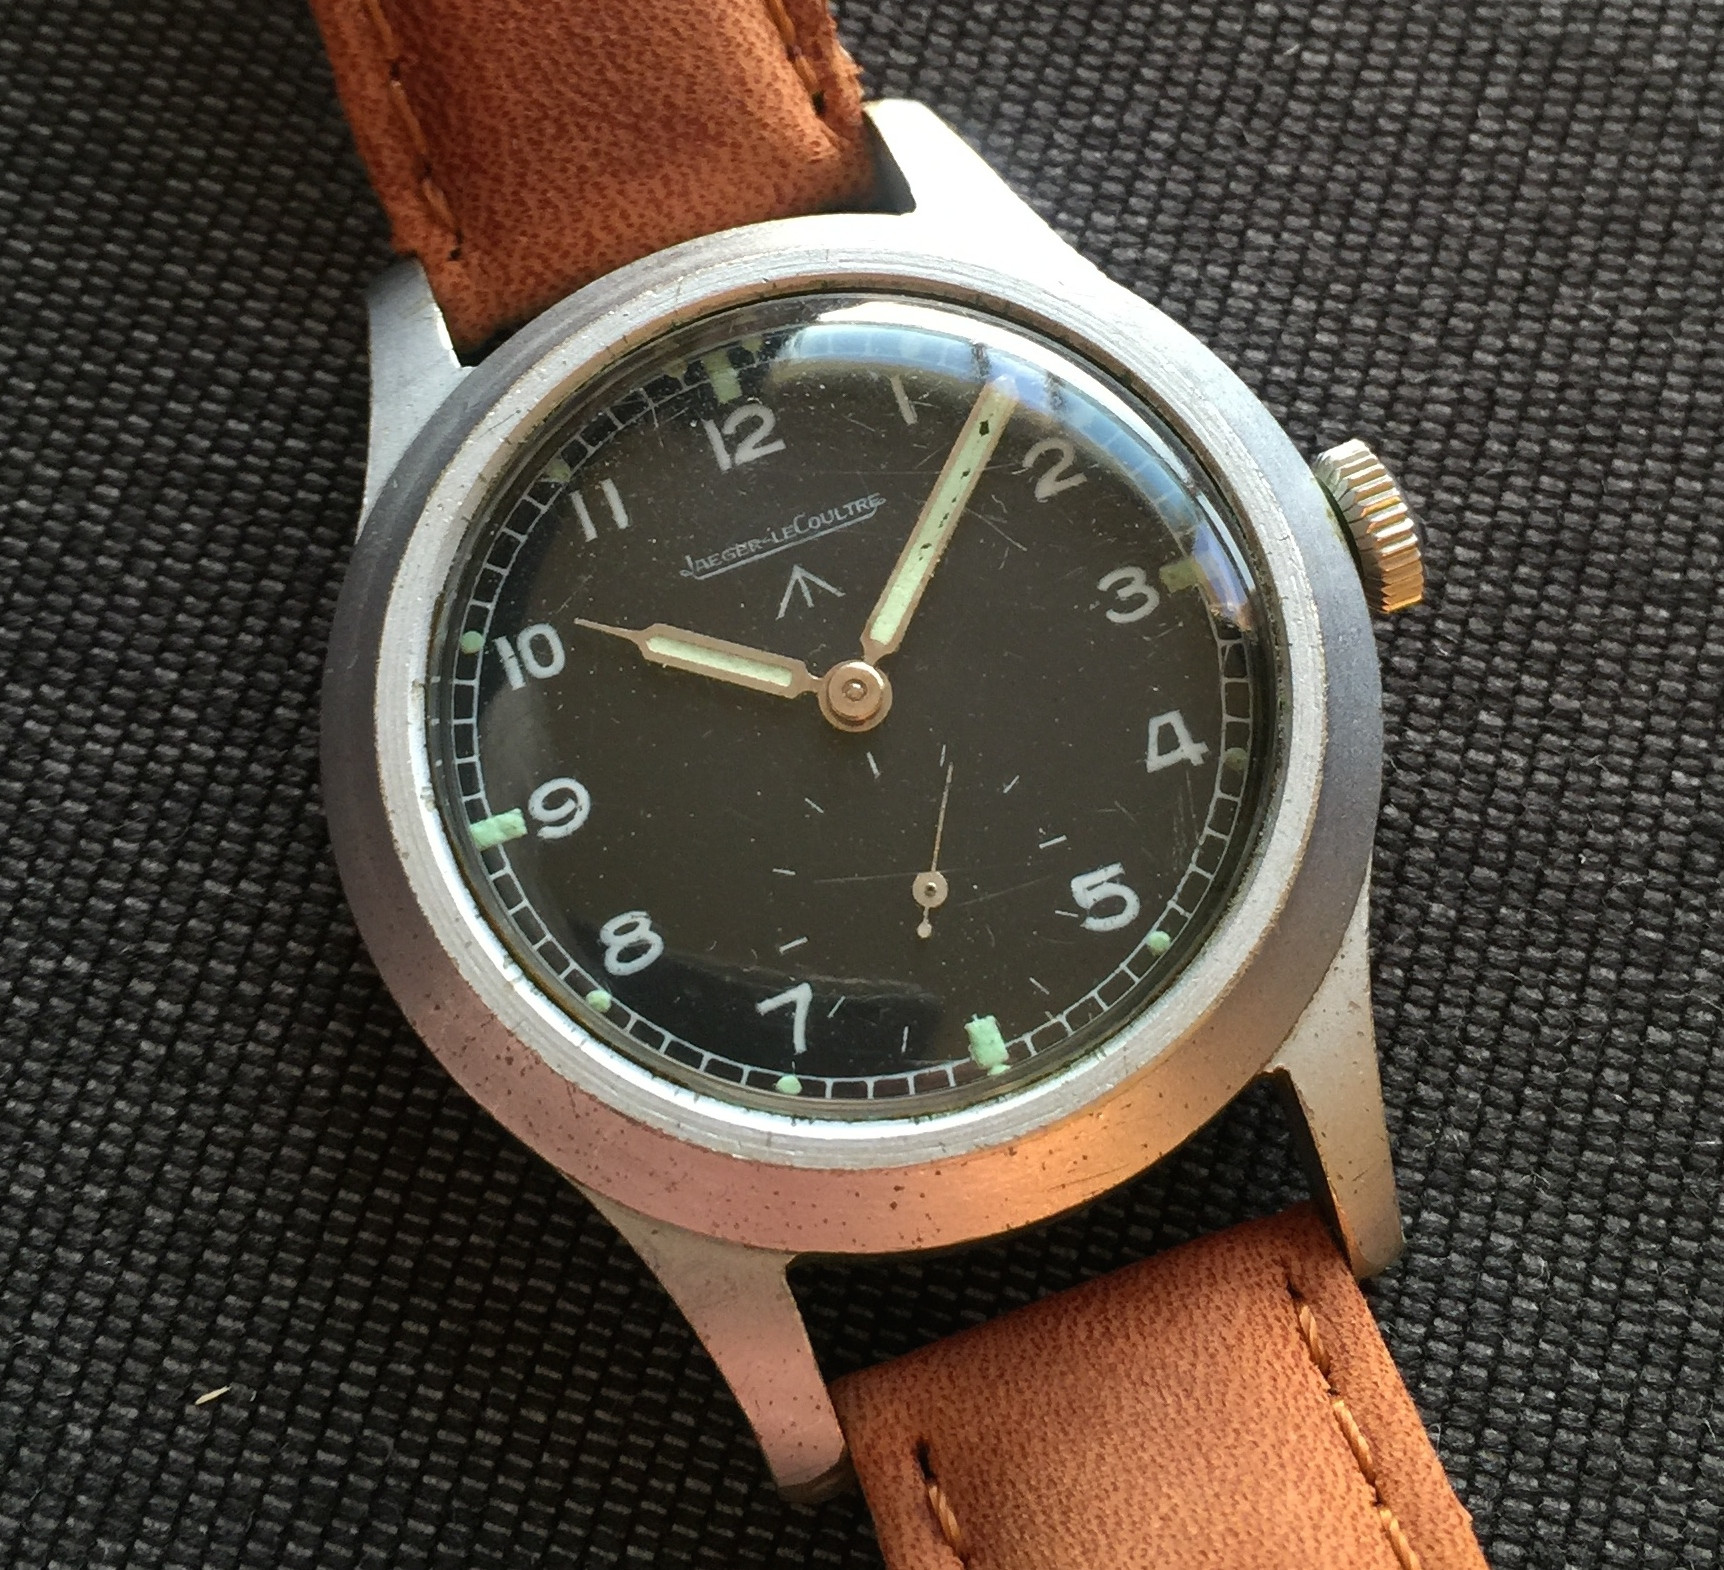 British WW2 W.W.W. Watch Produced by Jaeager LeCoultre